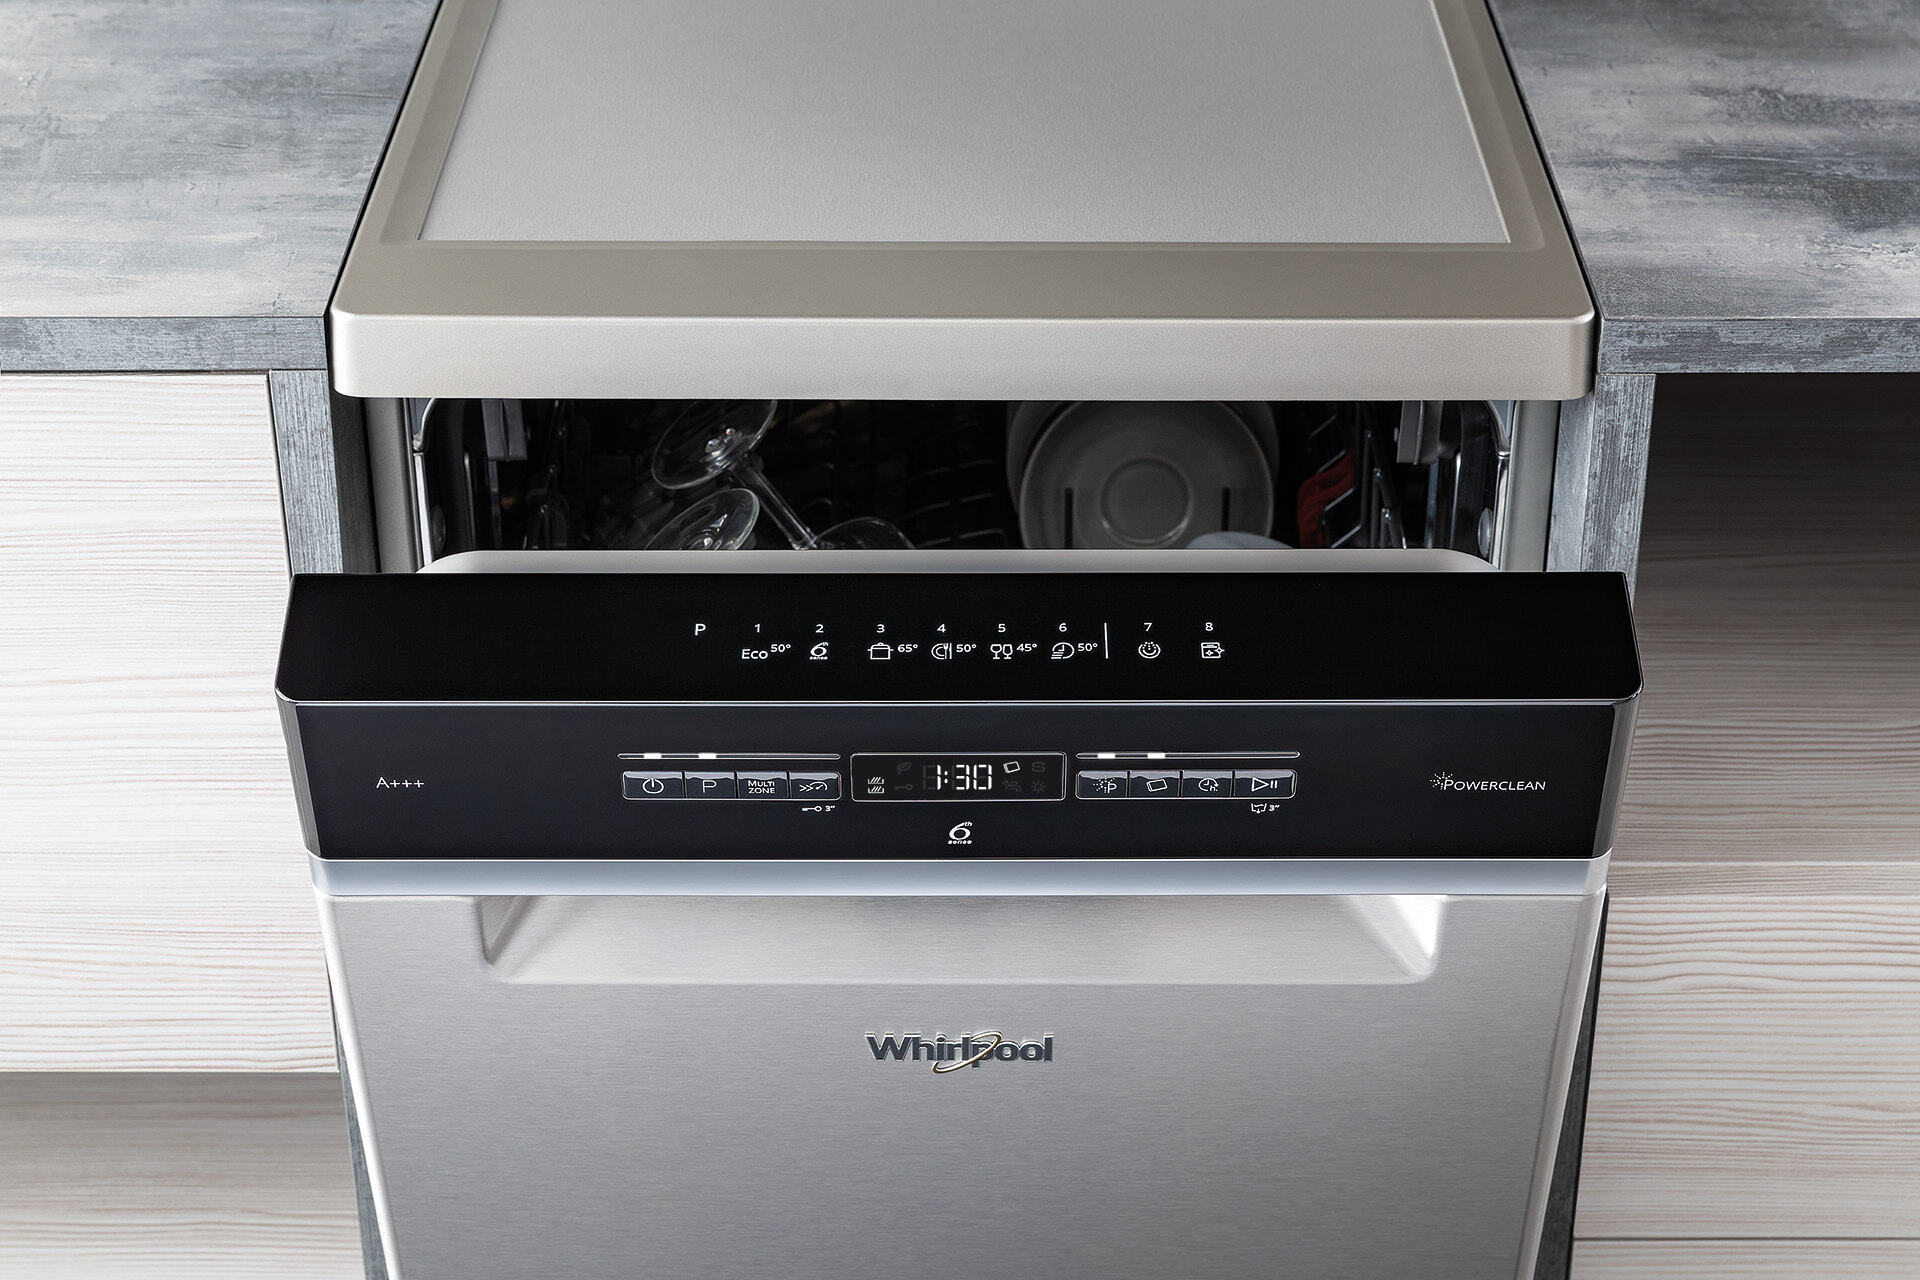 How To Fix The Error Code 44987 For Whirlpool Dishwasher